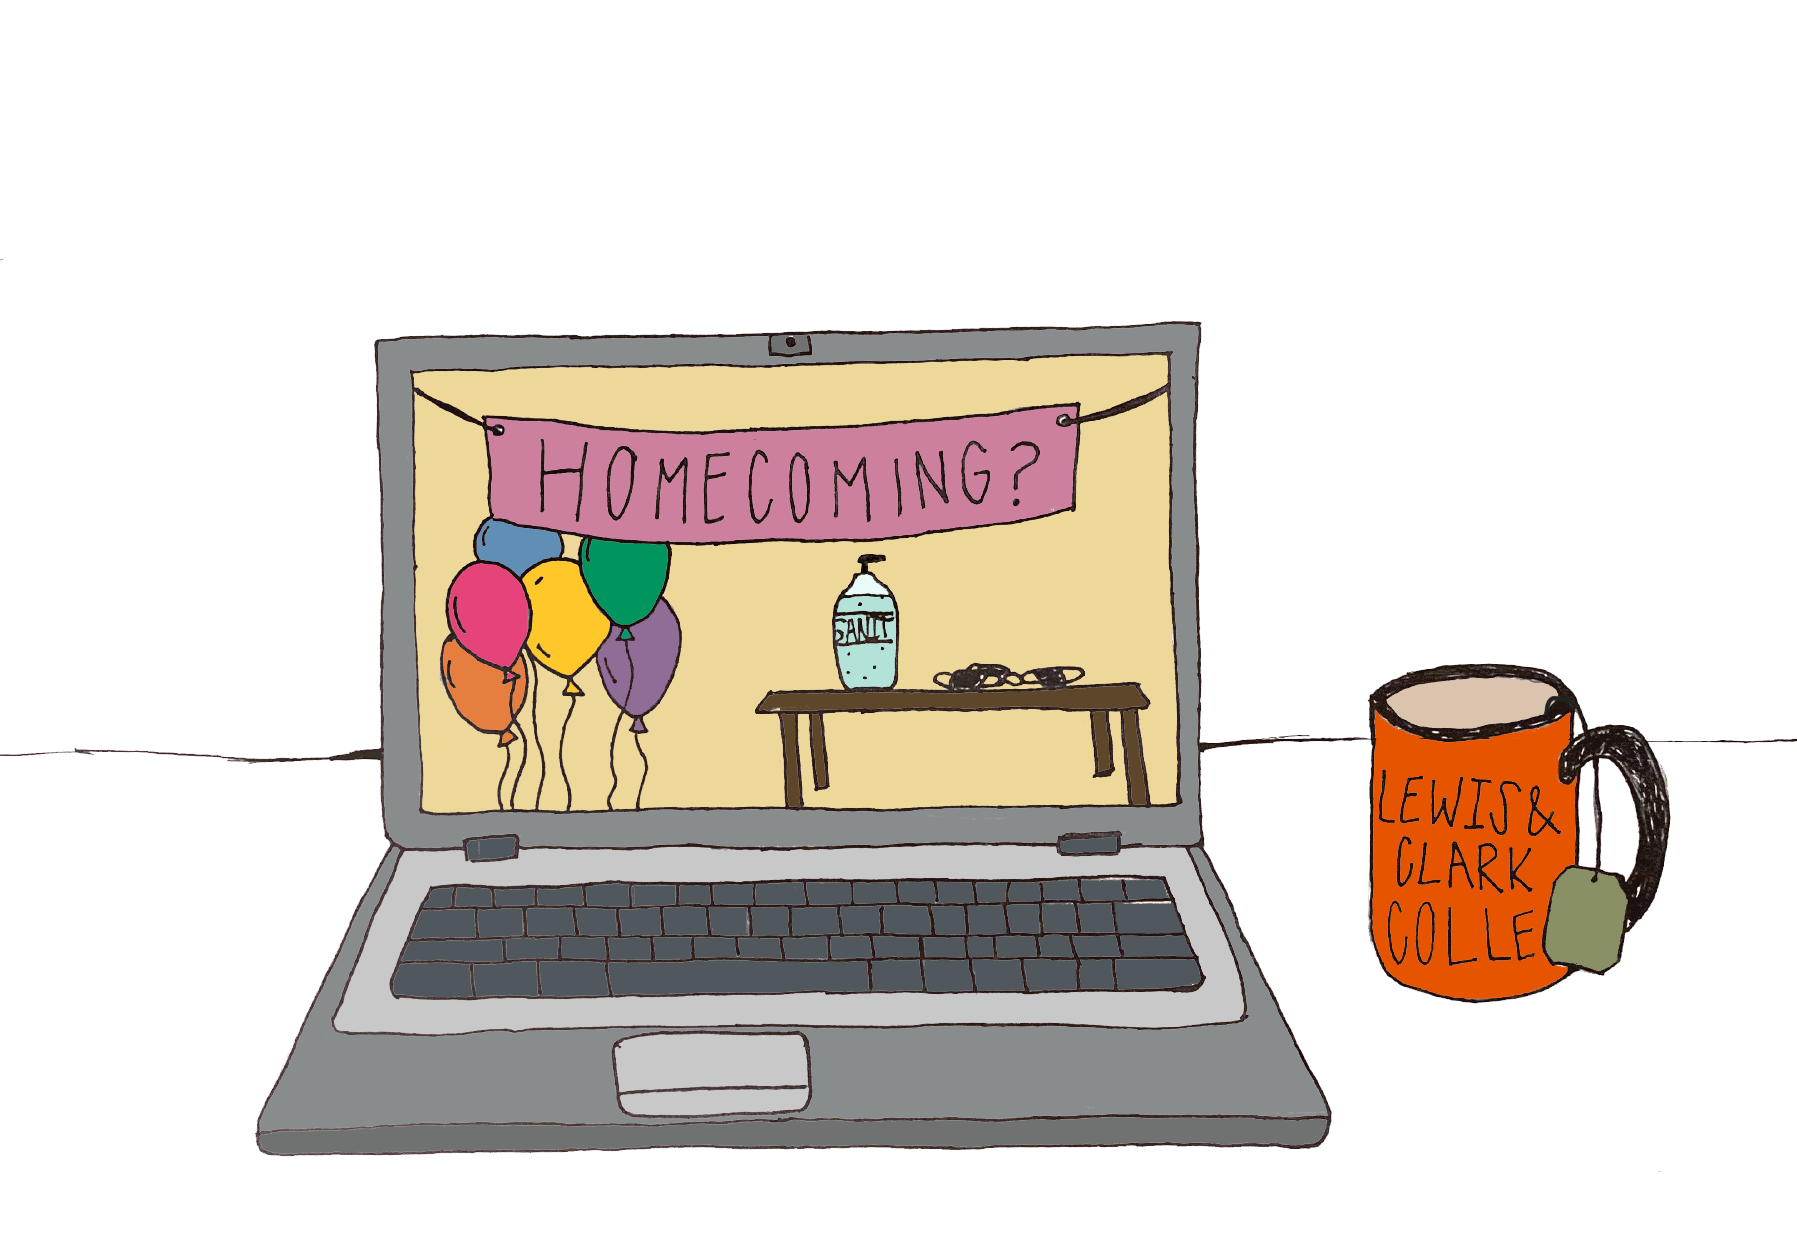 A laptop is open to a virtual version of Homecoming with a banner, balloons and hand sanitizer. Next to the laptop is an LC mug.